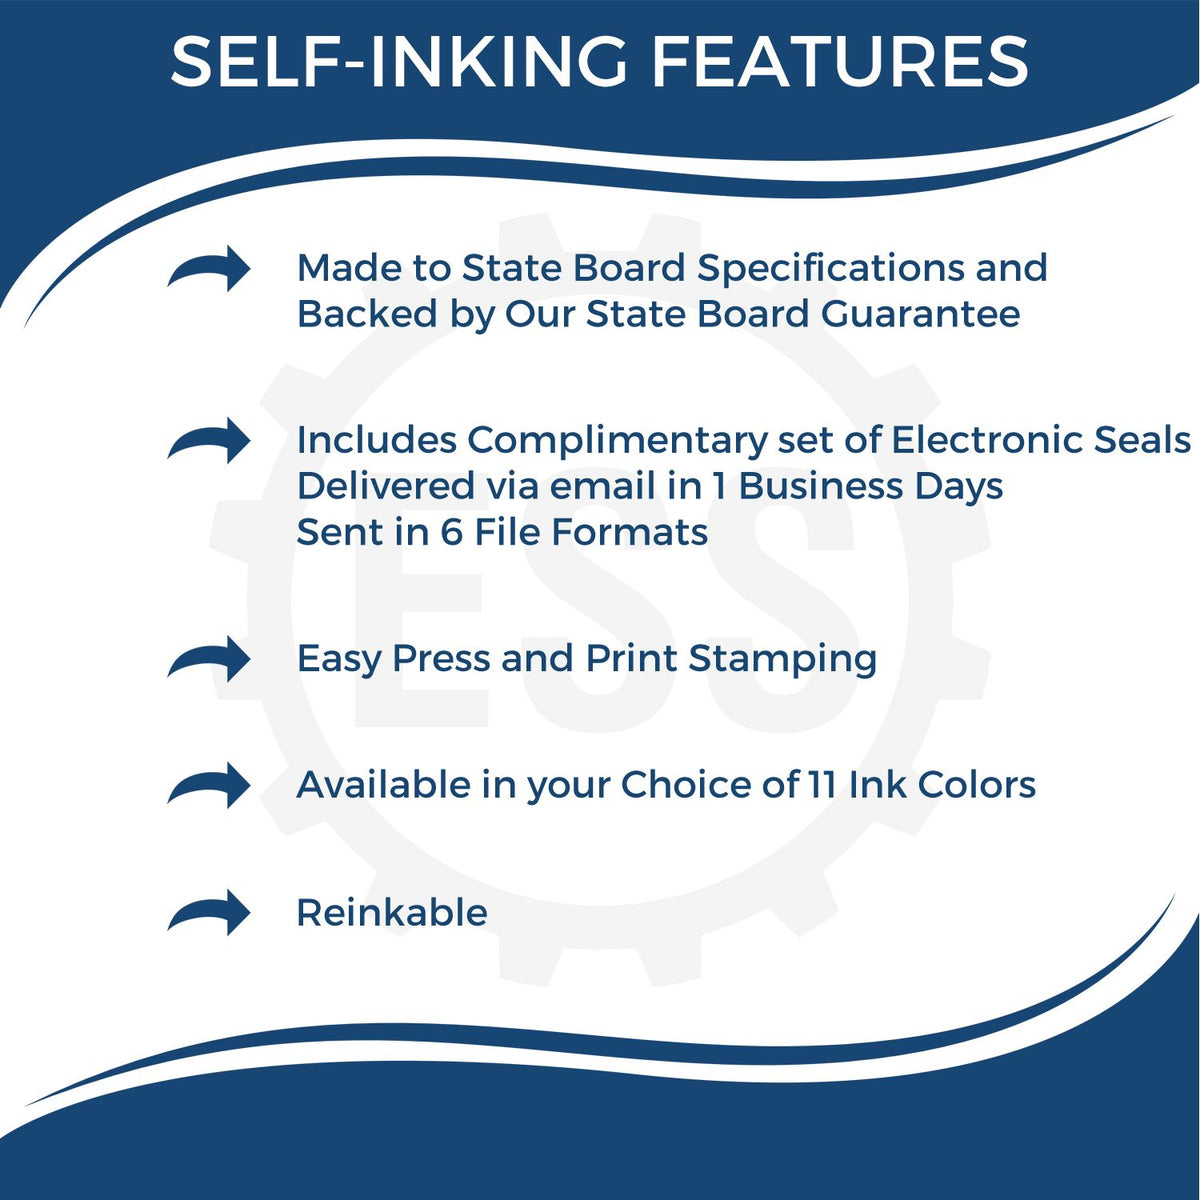 A picture of an infographic highlighting the selling points for the Self-Inking Rectangular Arkansas Notary Stamp